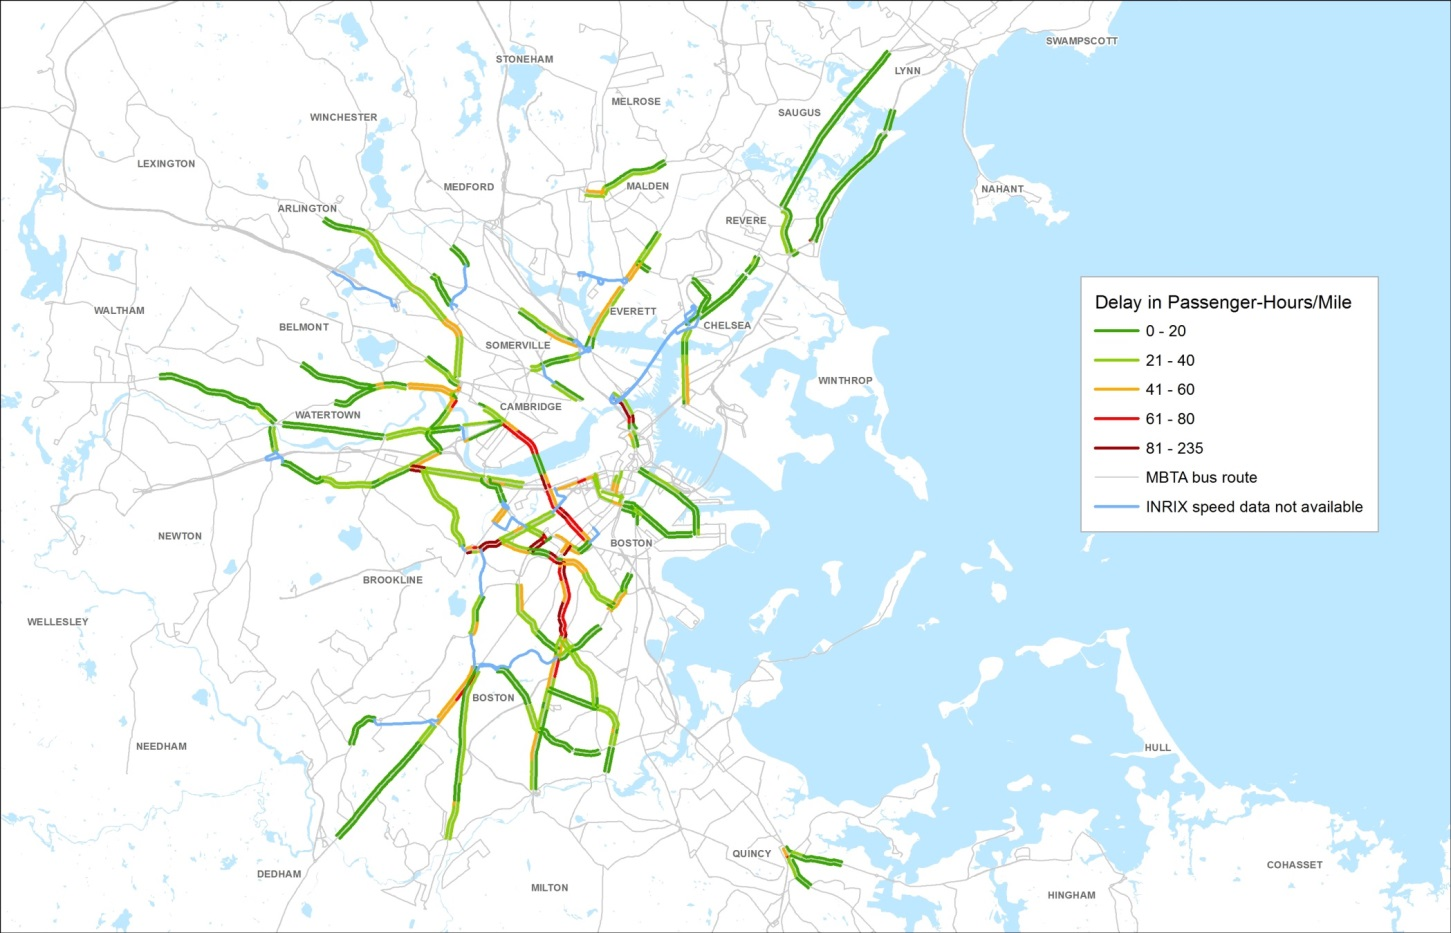 Maps showing congestion-related delay on high-ridership corridors